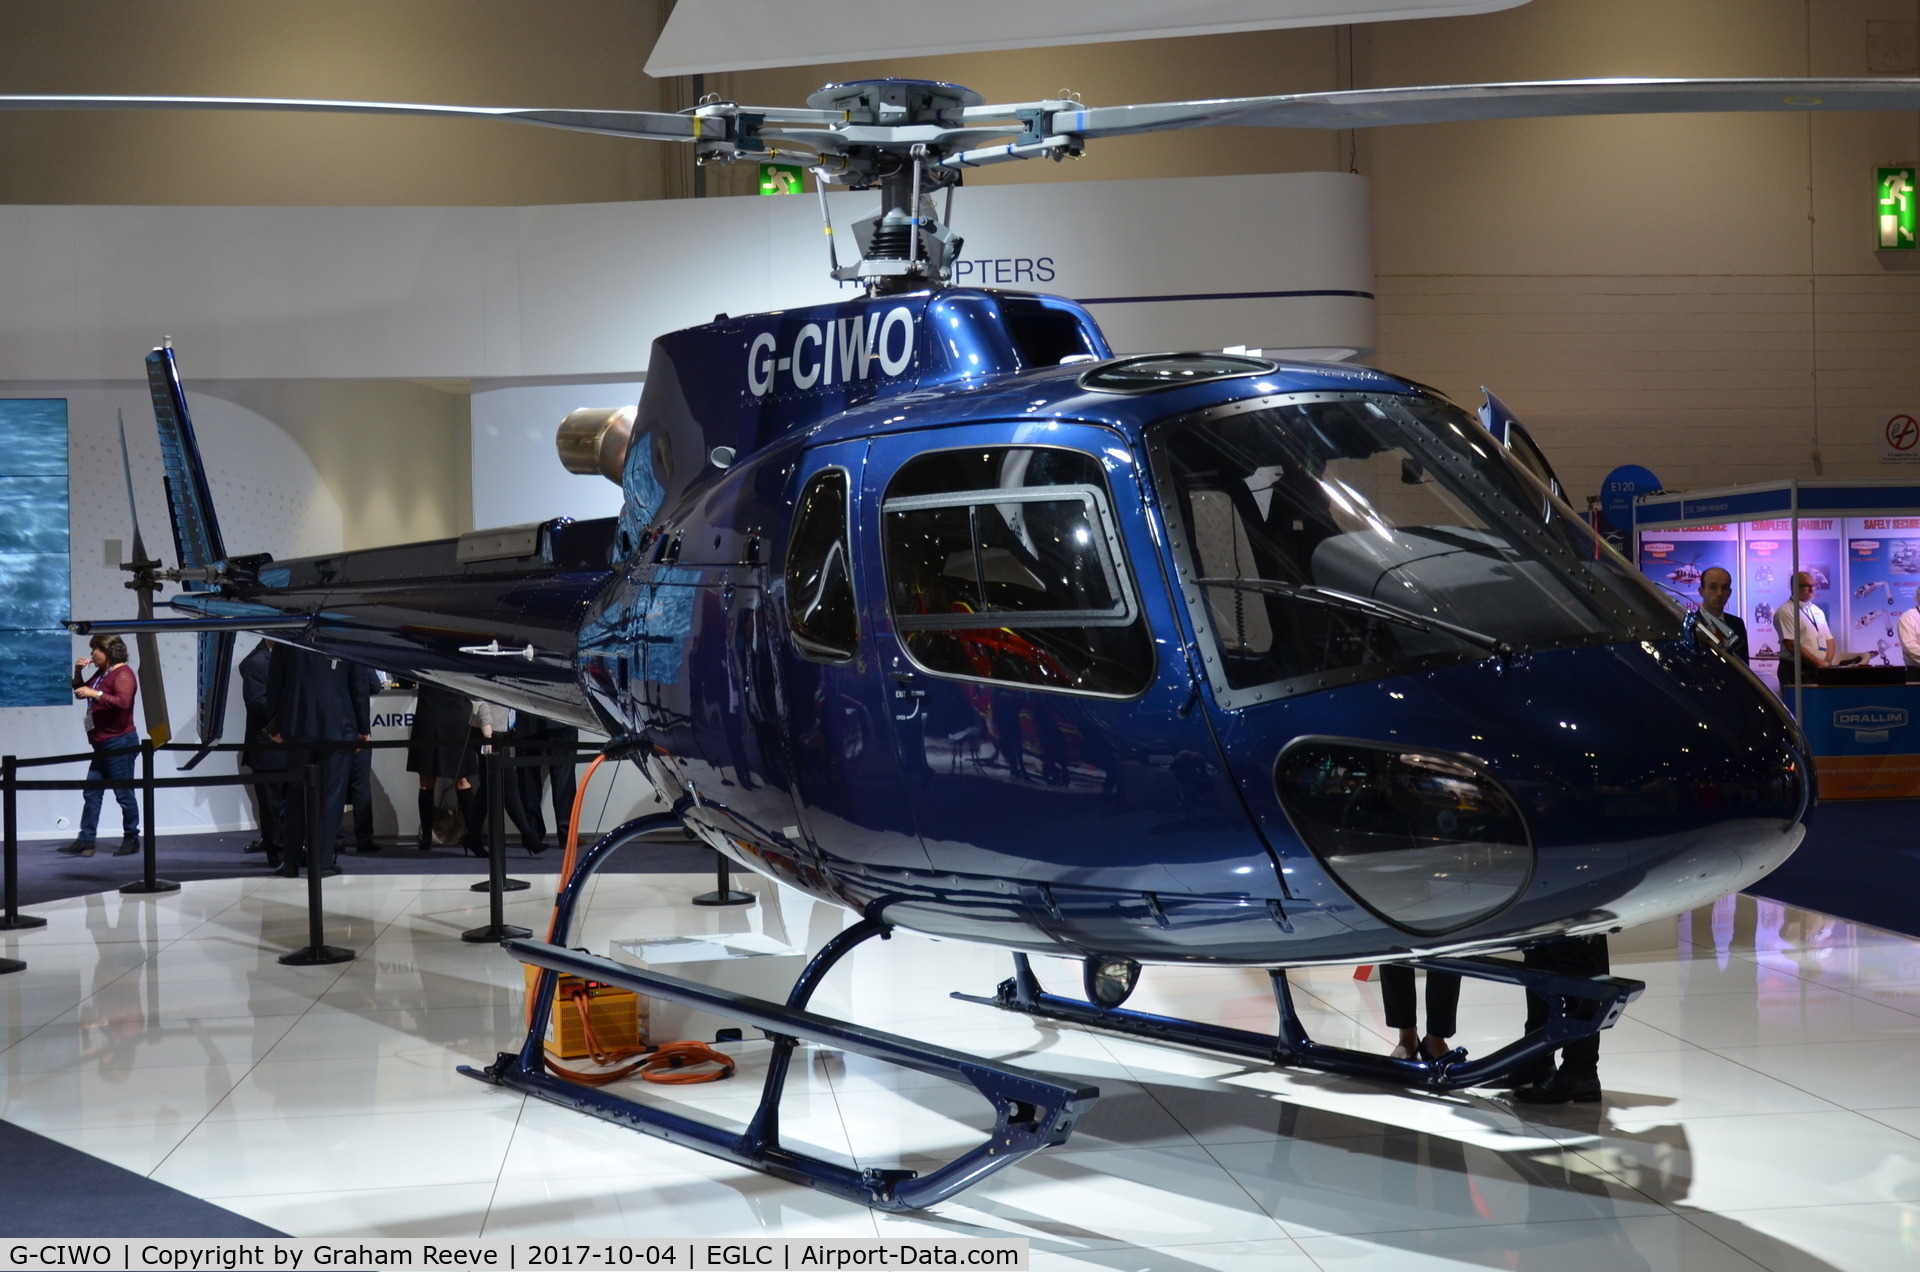 G-CIWO, 2015 Airbus Helicopters AS-350B-3 Ecureuil C/N 8191, Parked inside the ExCel Centre, London, for Helitech 2017.